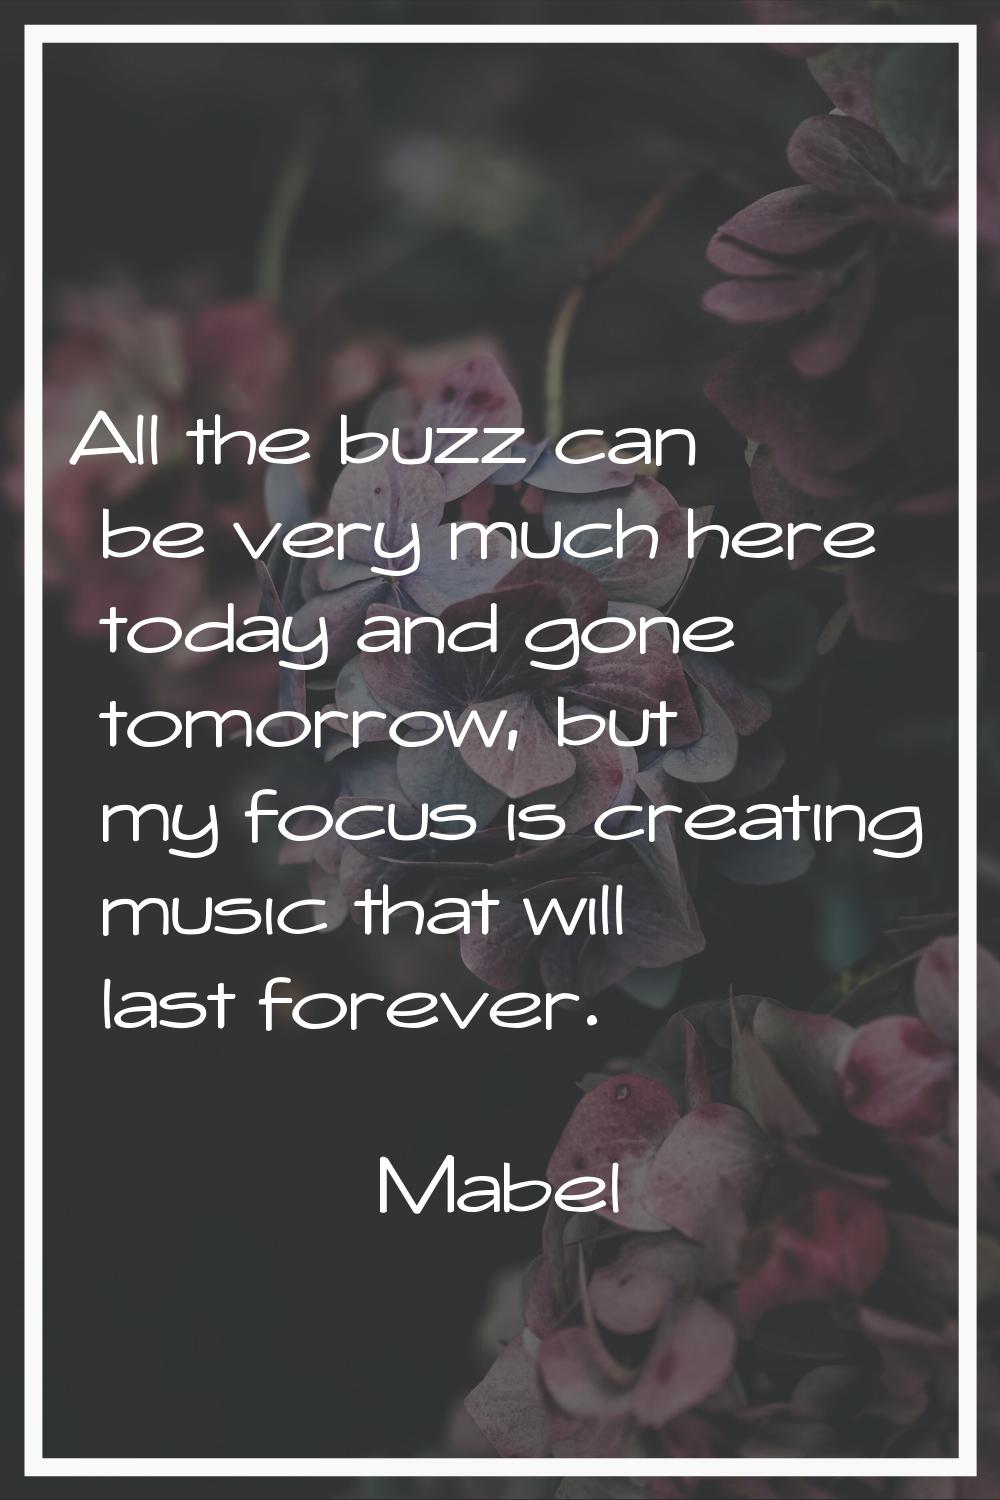 All the buzz can be very much here today and gone tomorrow, but my focus is creating music that wil